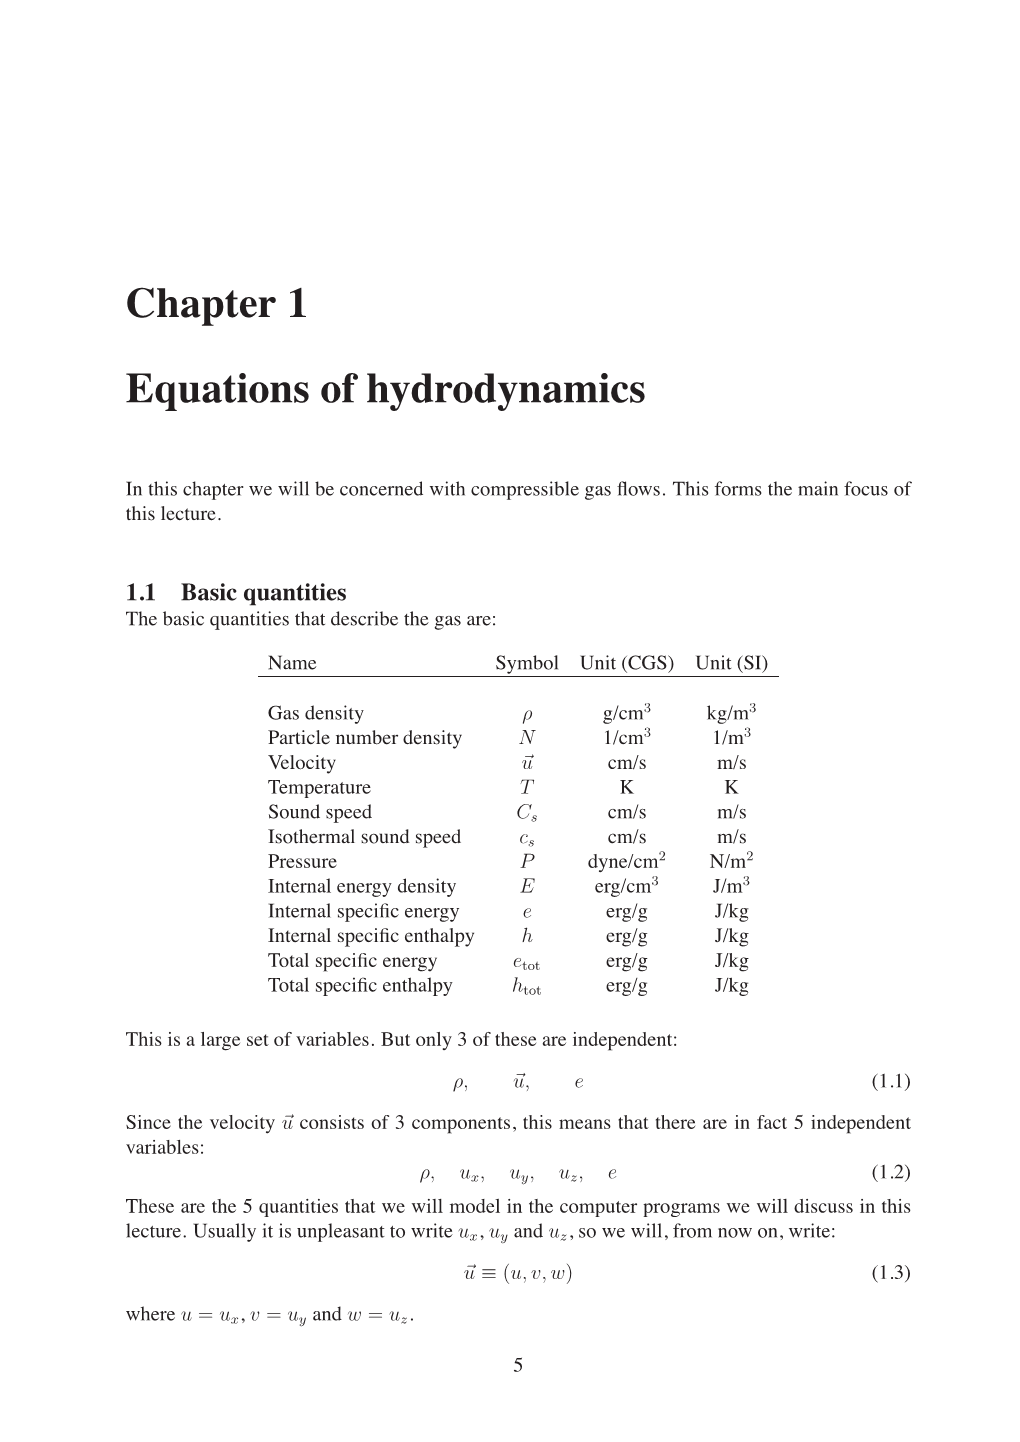 Chapter 1 Equations of Hydrodynamics